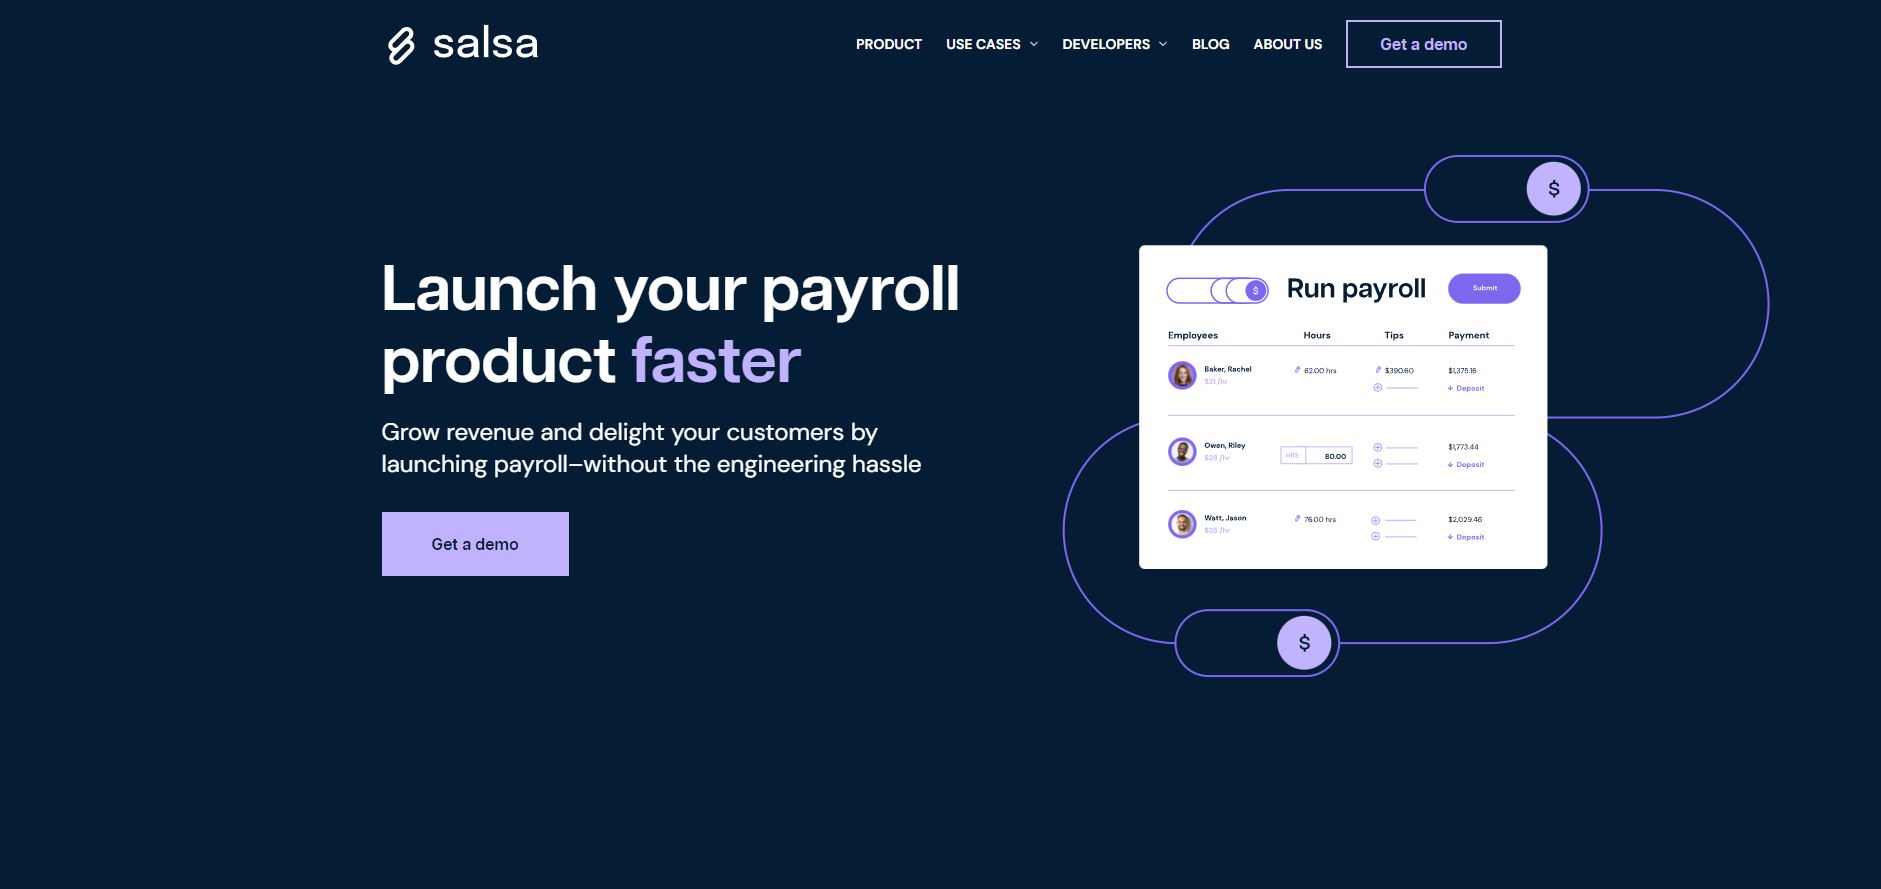 With $10M in funding and a star-studded list of investors, Salsa has quickly become a force to be reckoned with in the software development industry. 